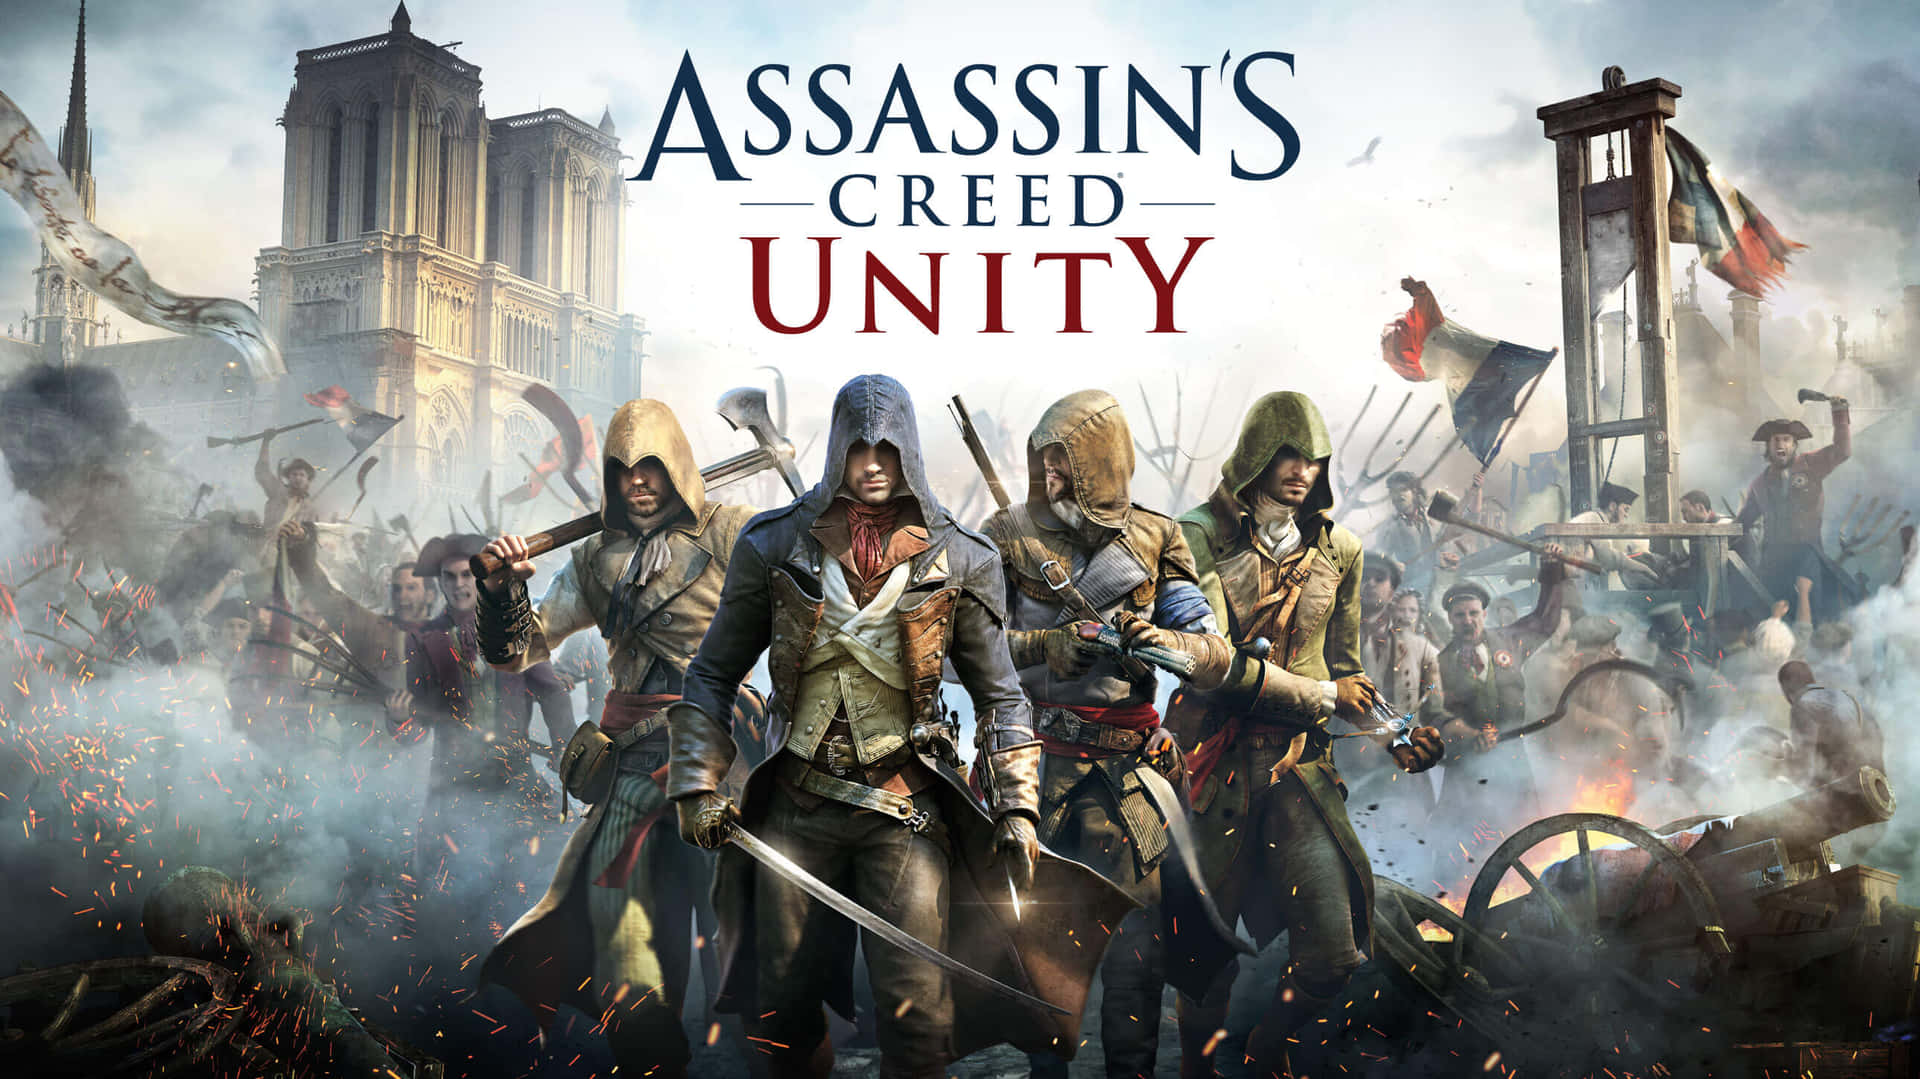 Arno Dorian's Epic Leap in Assassin's Creed Unity Wallpaper